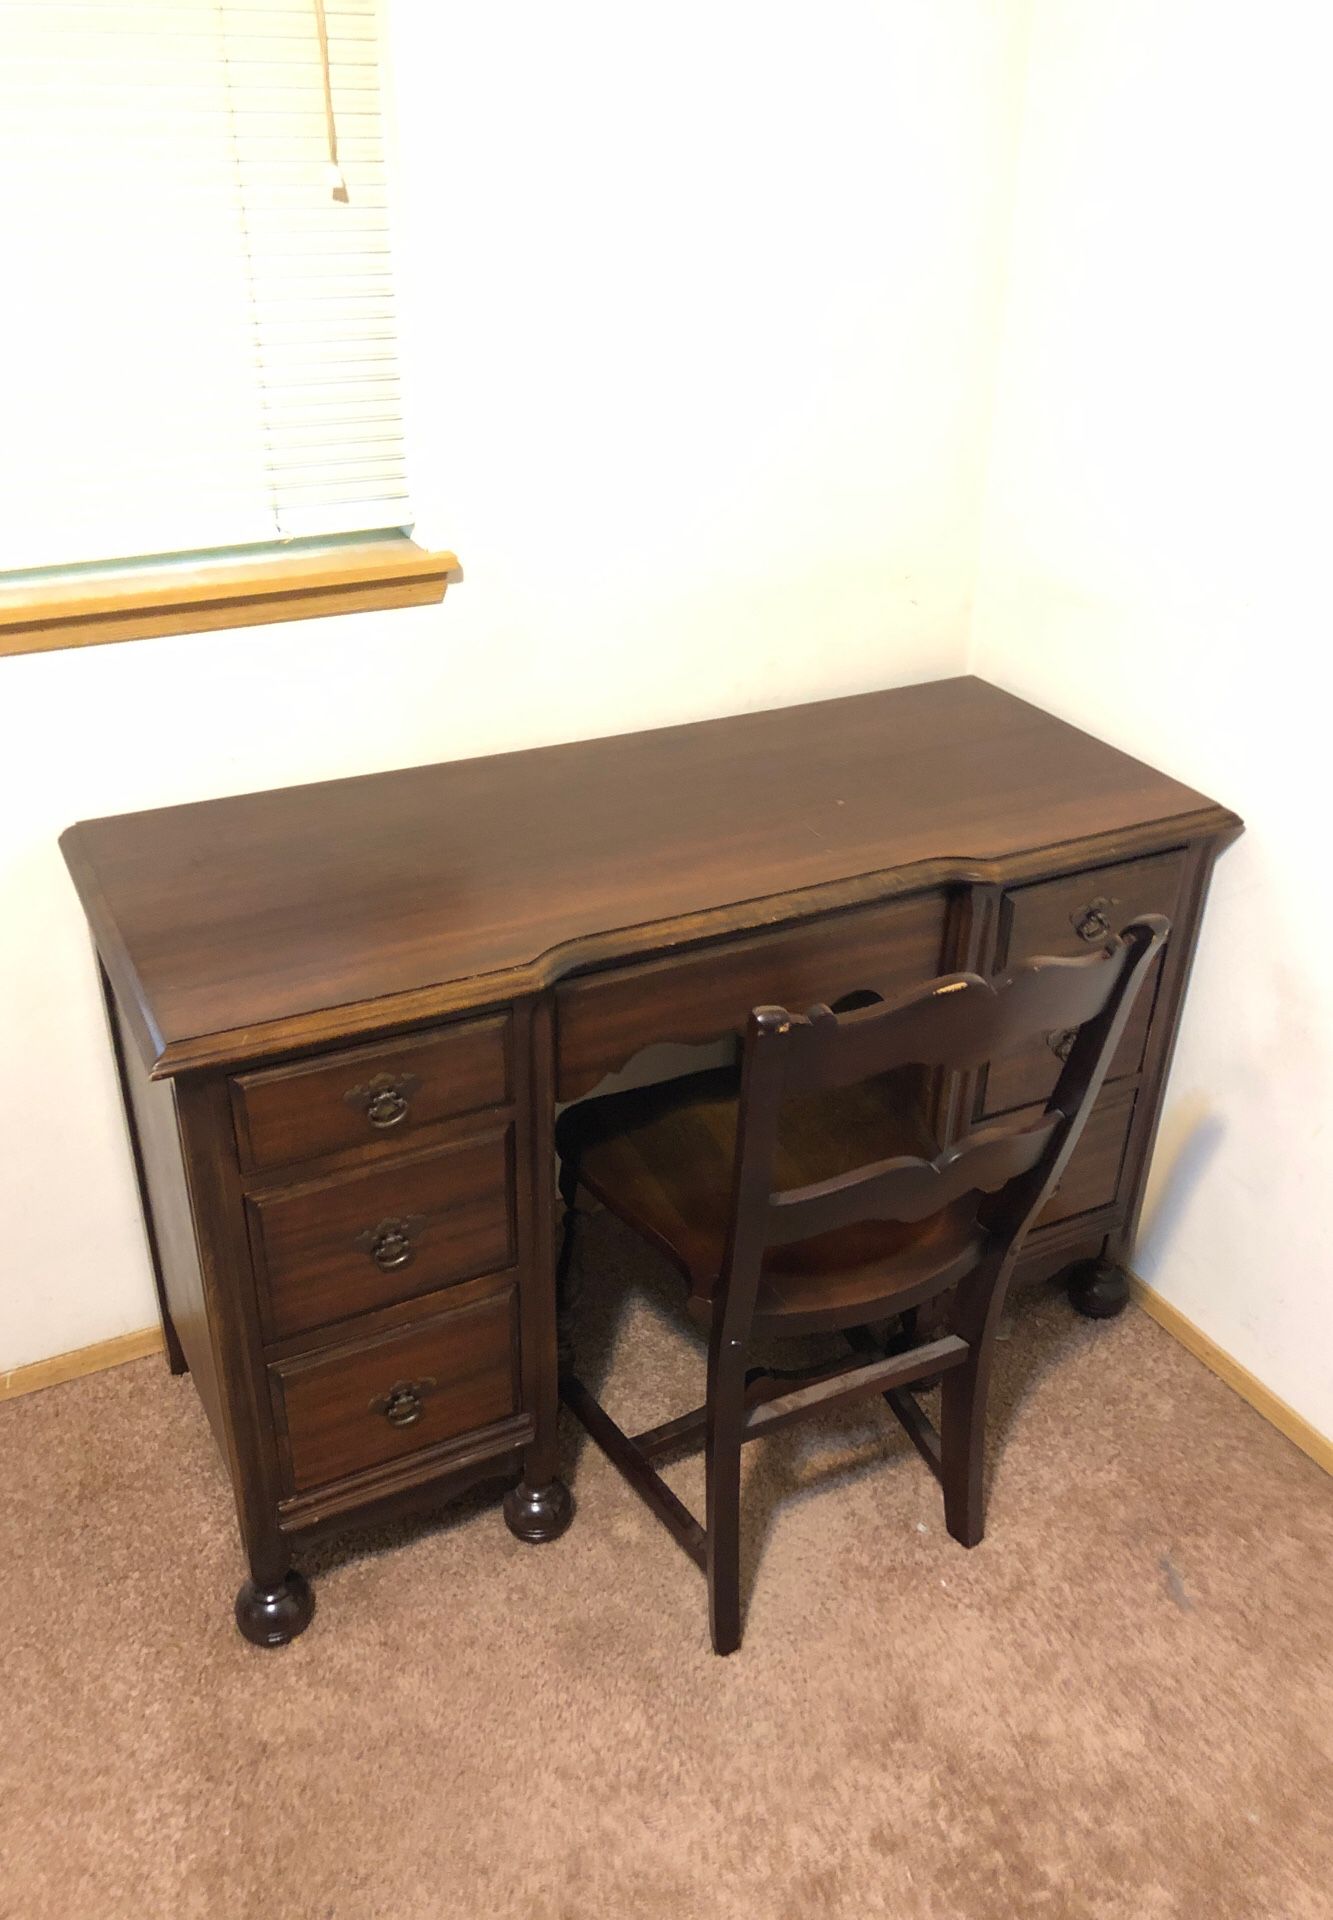 Beautiful Small desk and antique chair